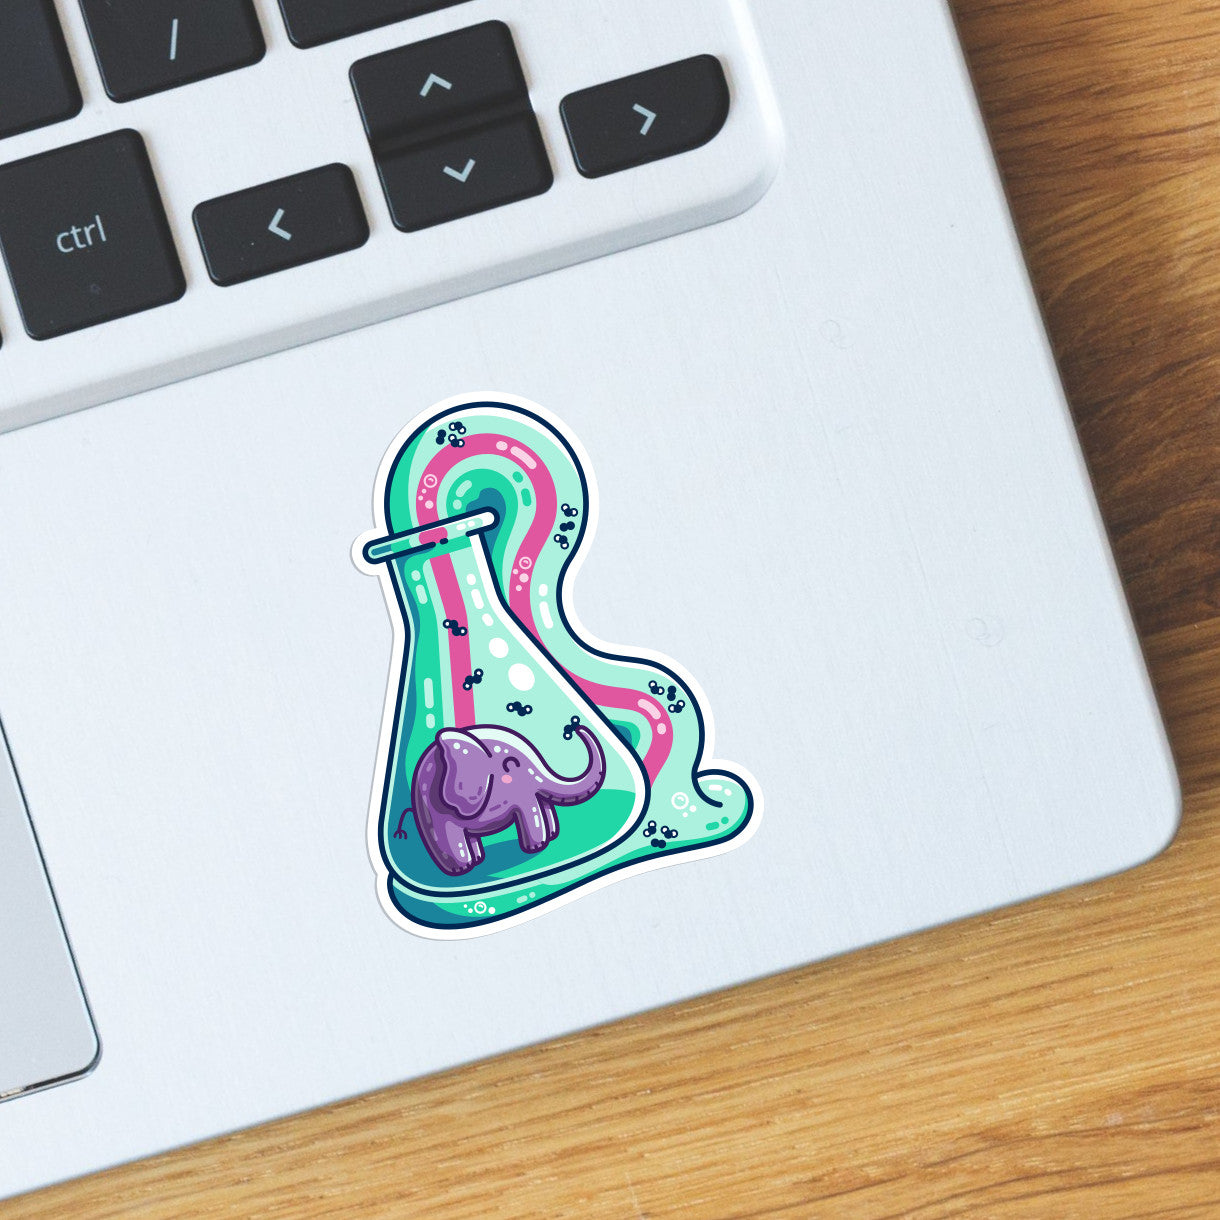 The bottom right hand corner of a laptop computer keyboard with a die cut vinyl sticker on it that is the shape of the purple, pink and green elephant toothpaste design